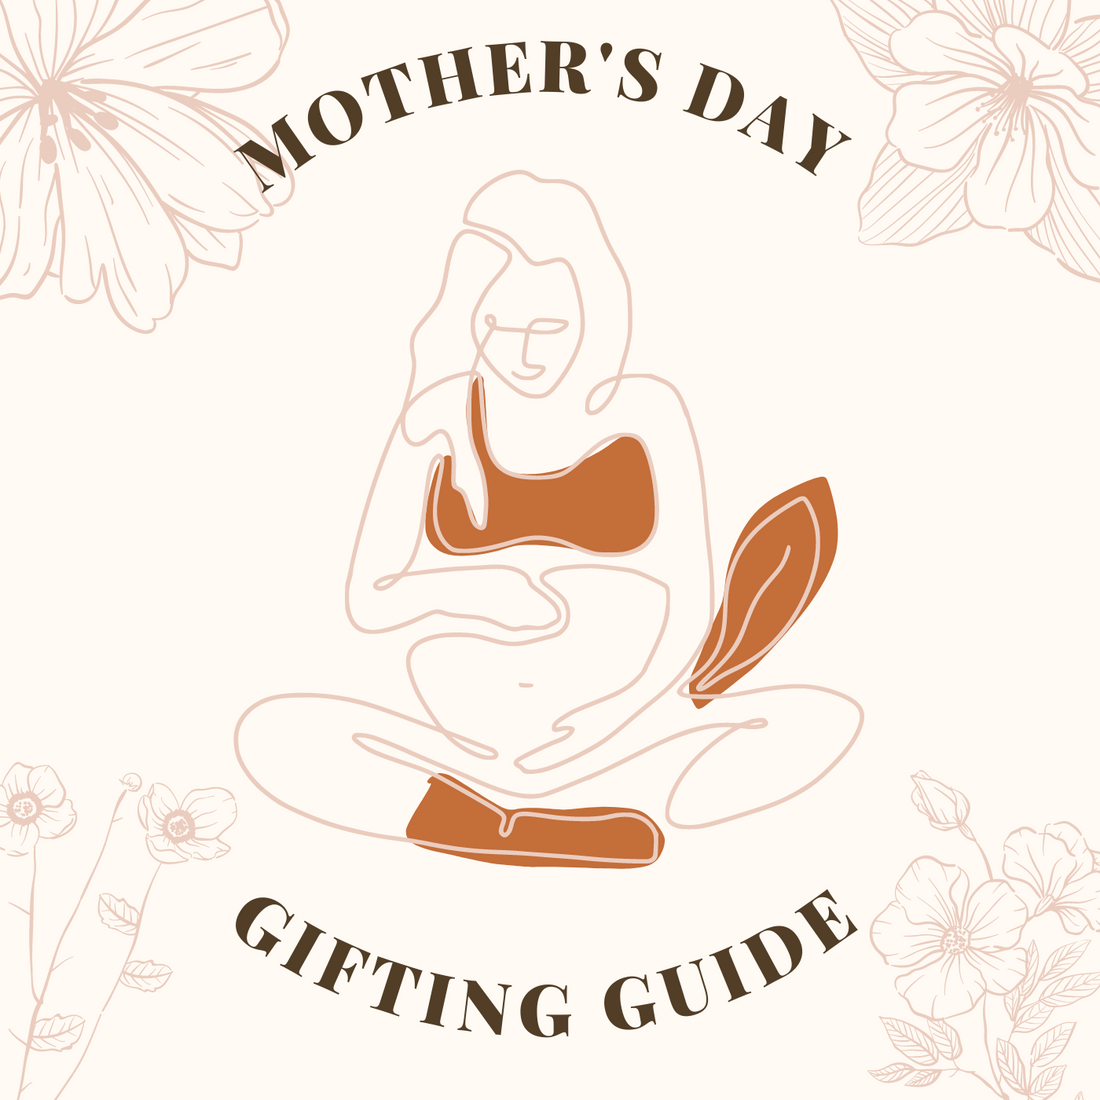 The ultimate gifting guide: Mother’s Day Edition